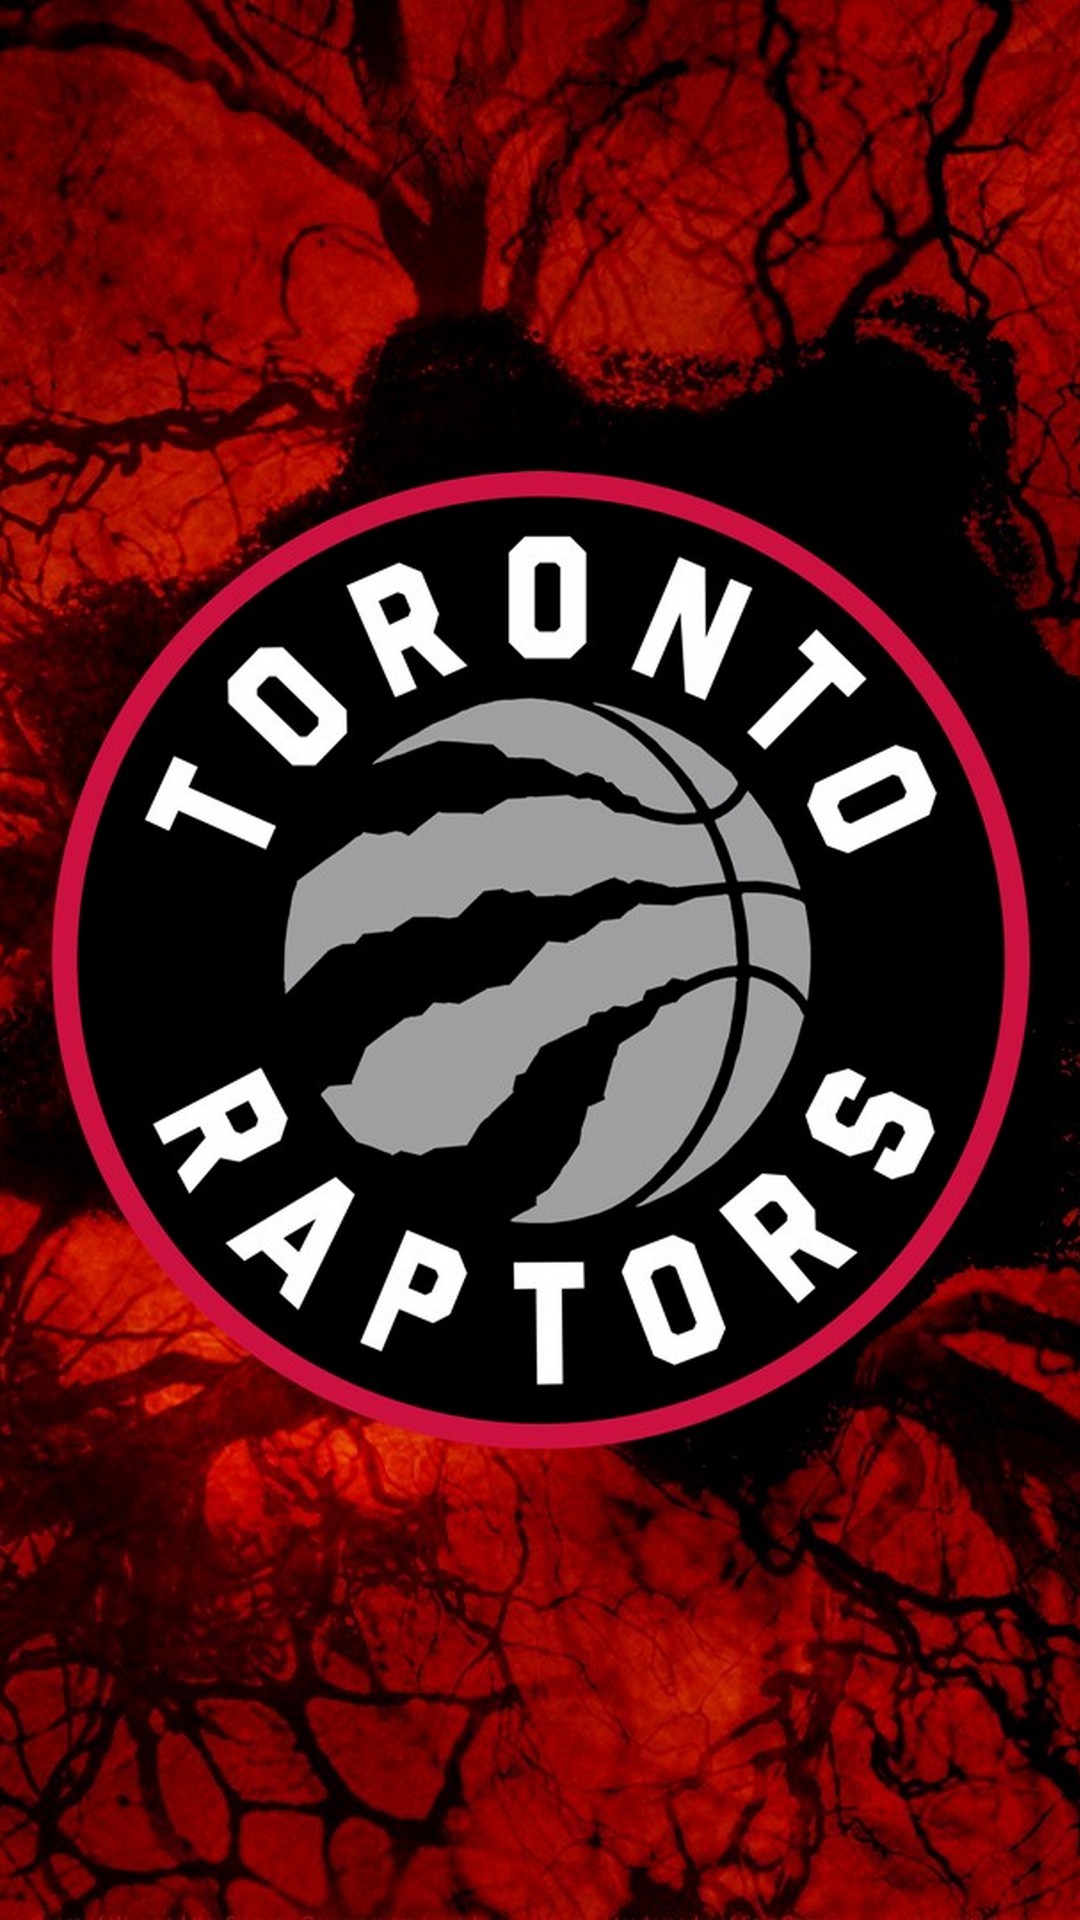 Wallpaper Android Toronto Raptors with image resolution 1080x1920 pixel. You can make this wallpaper for your Android backgrounds, Tablet, Smartphones Screensavers and Mobile Phone Lock Screen